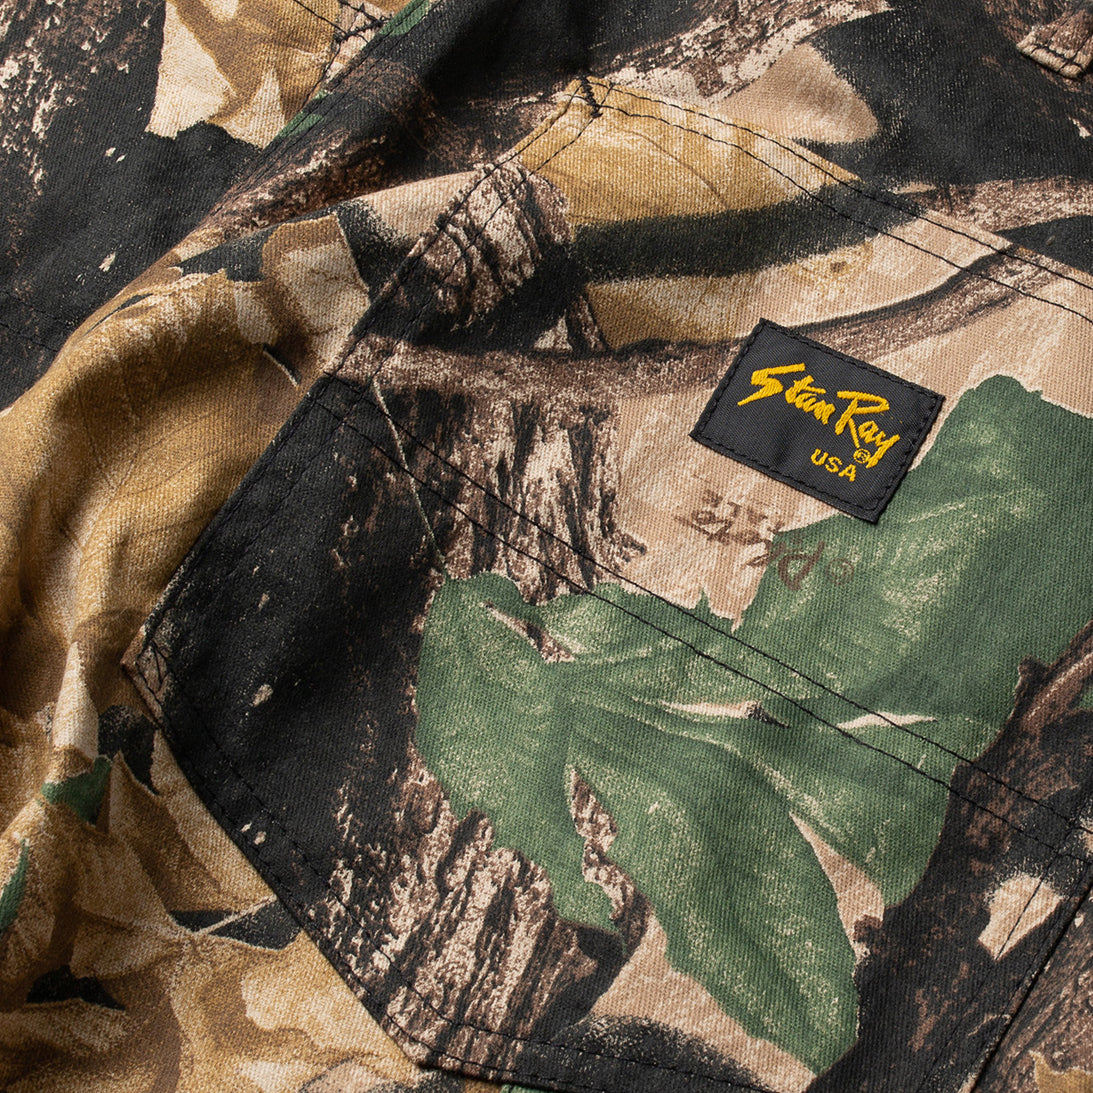 Introducing… the Deadstock Camo Collection